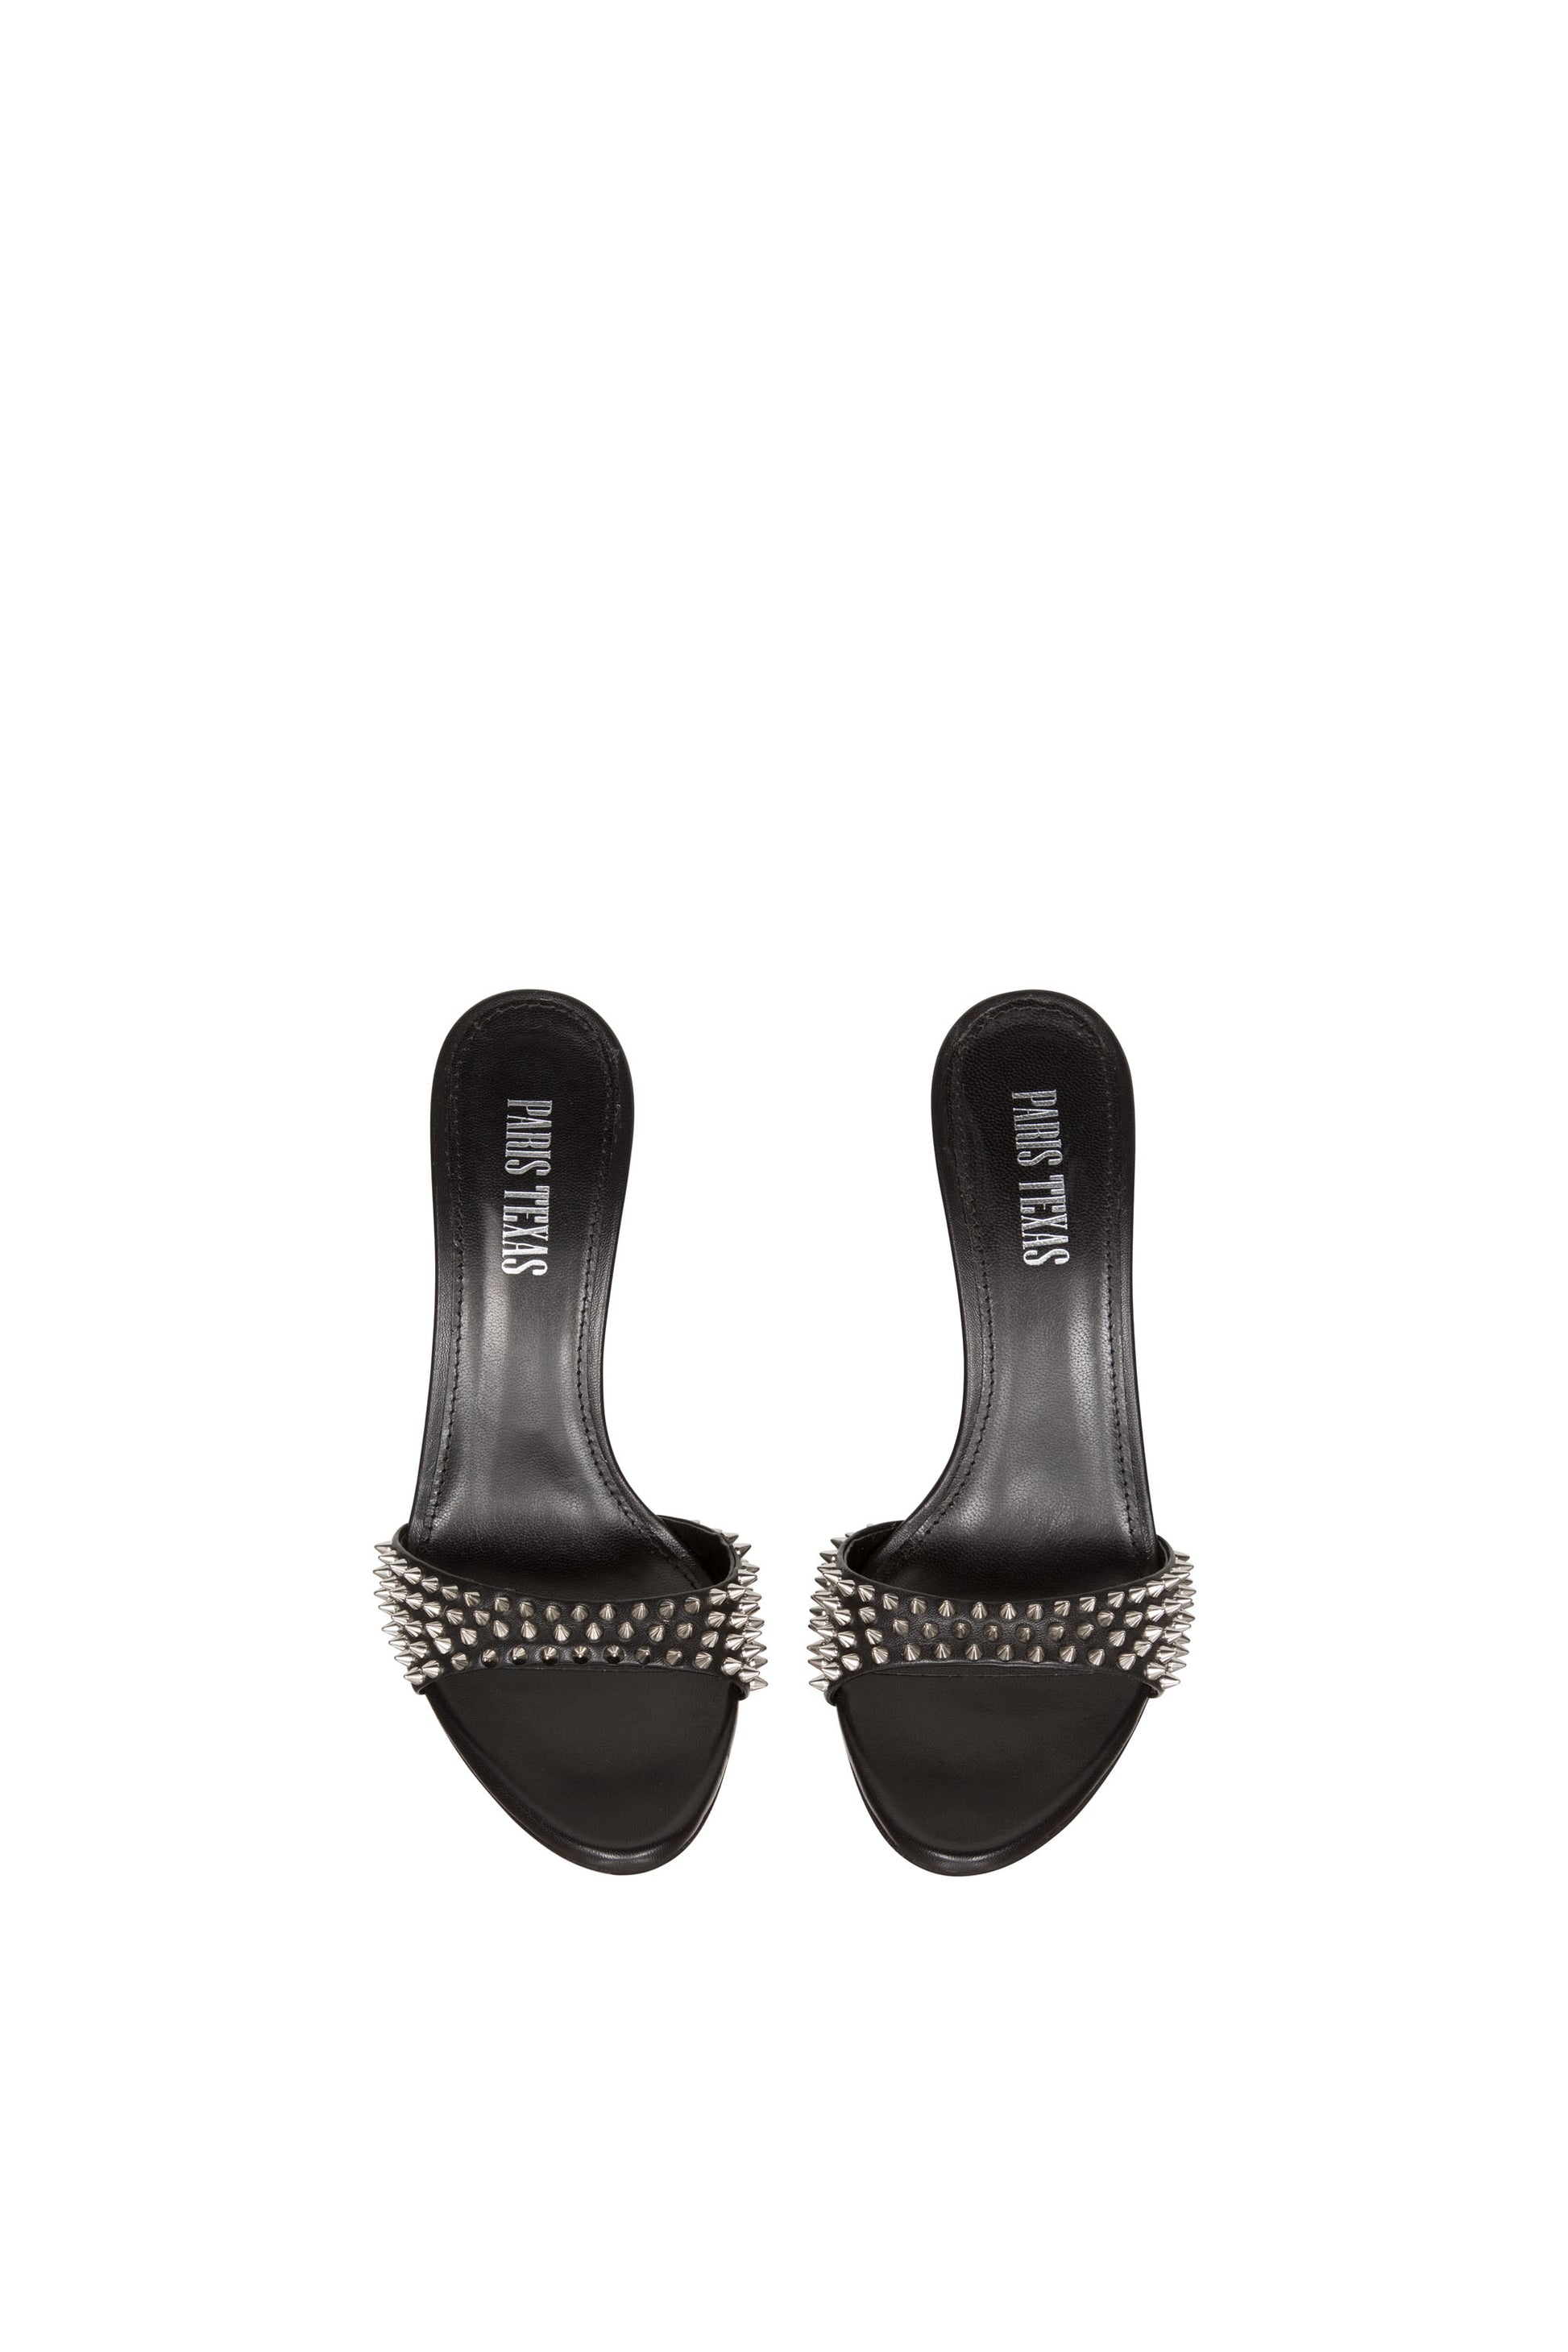 Black studded nappa leather mules - Top view